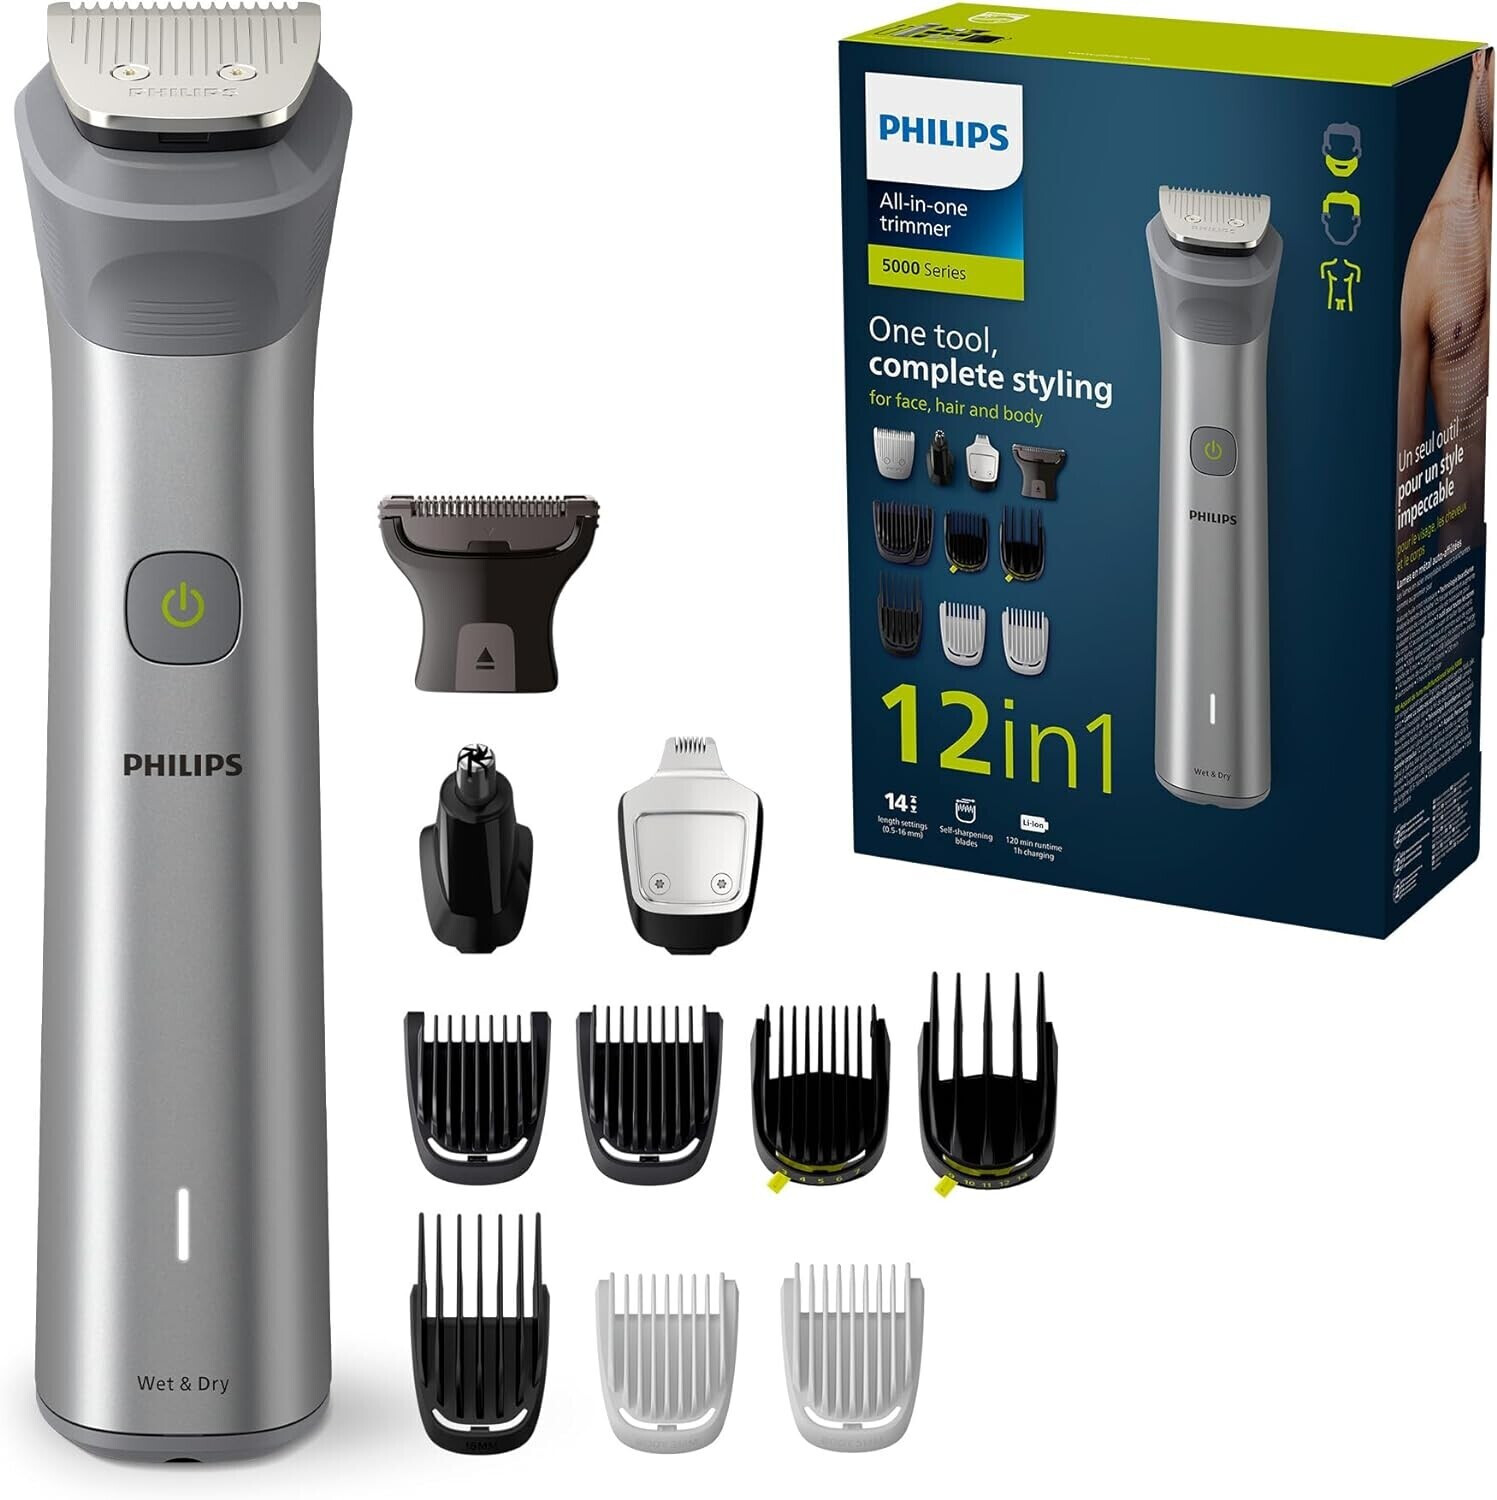 Photos - Hair Clipper Philips All-in-One Trimmer Series 5000 MG5950/15 